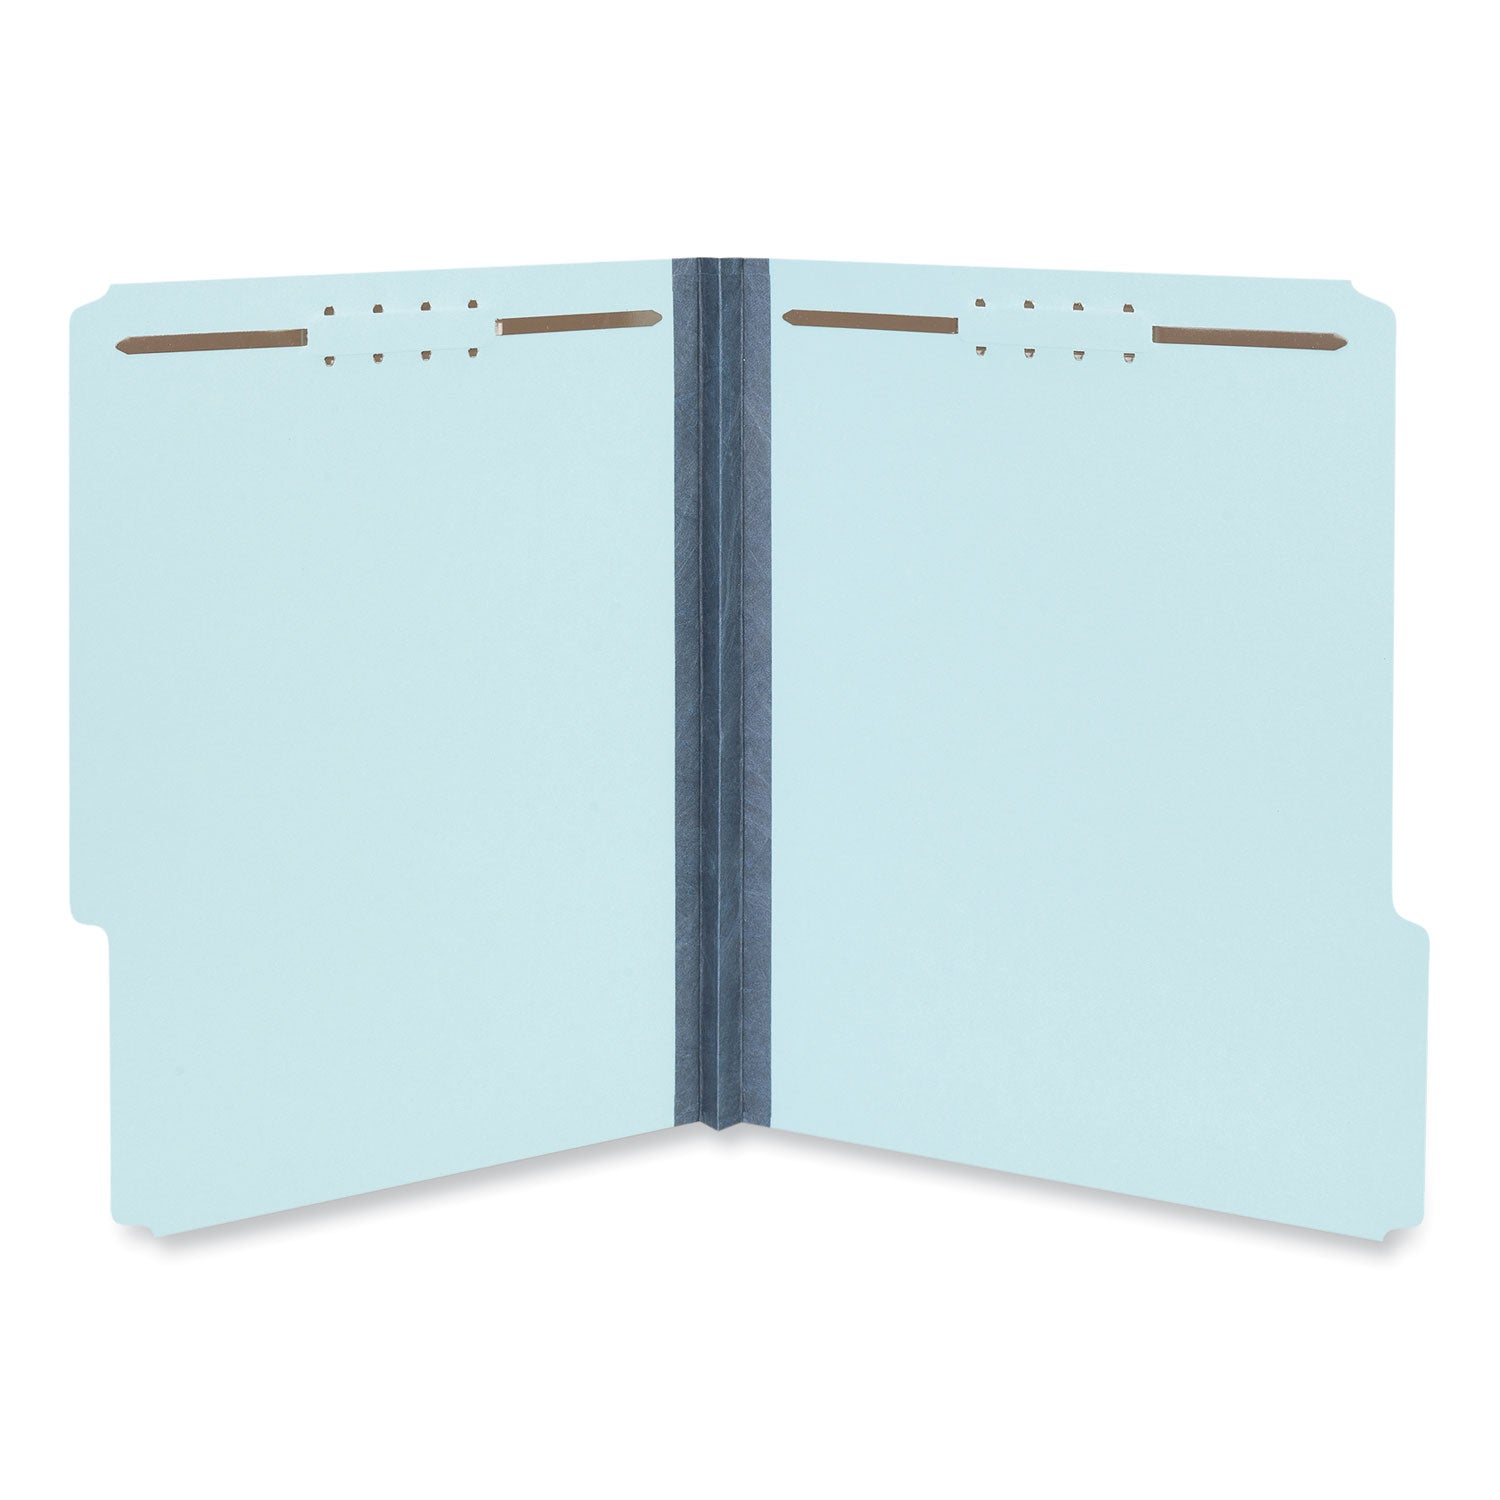 top-tab-classification-folders-1-expansion-2-fasteners-letter-size-light-blue-exterior-25-box_unv10415 - 1